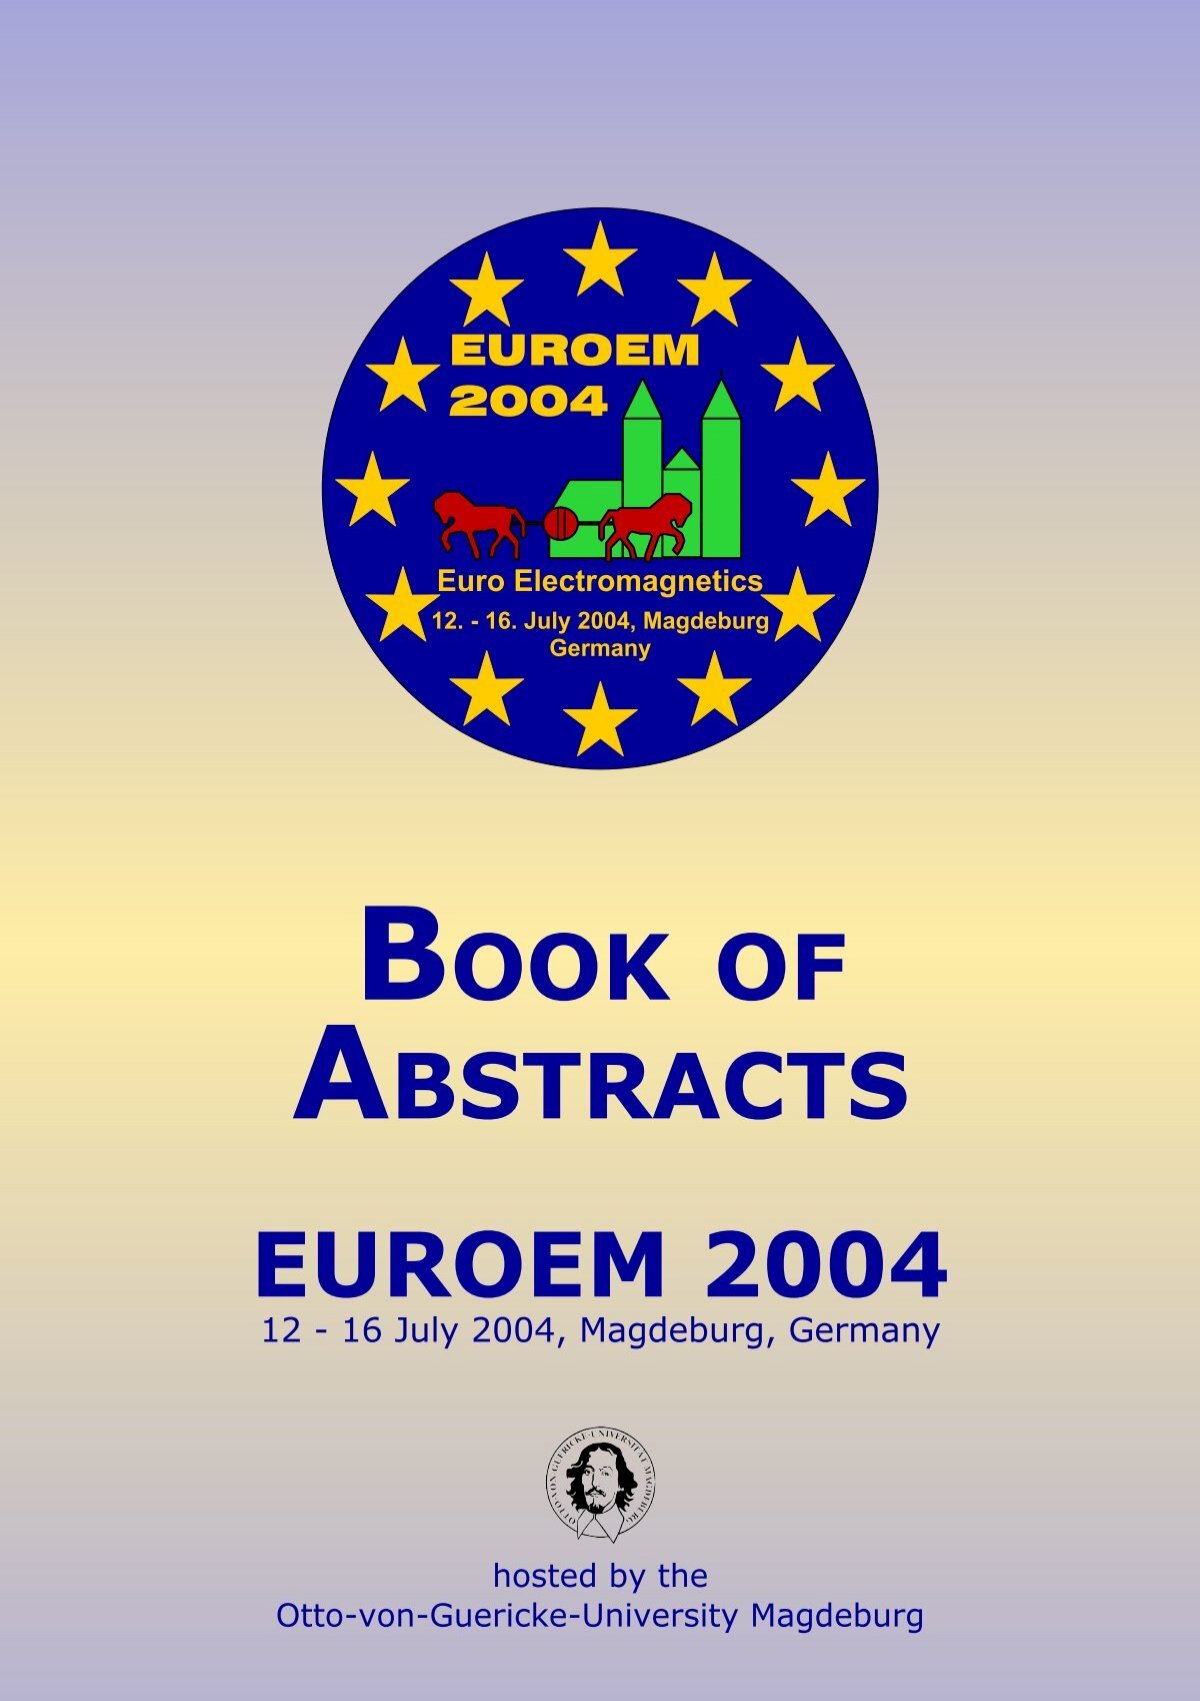 EUROEM 2004 Book of Abstracts - Electrical and Computer